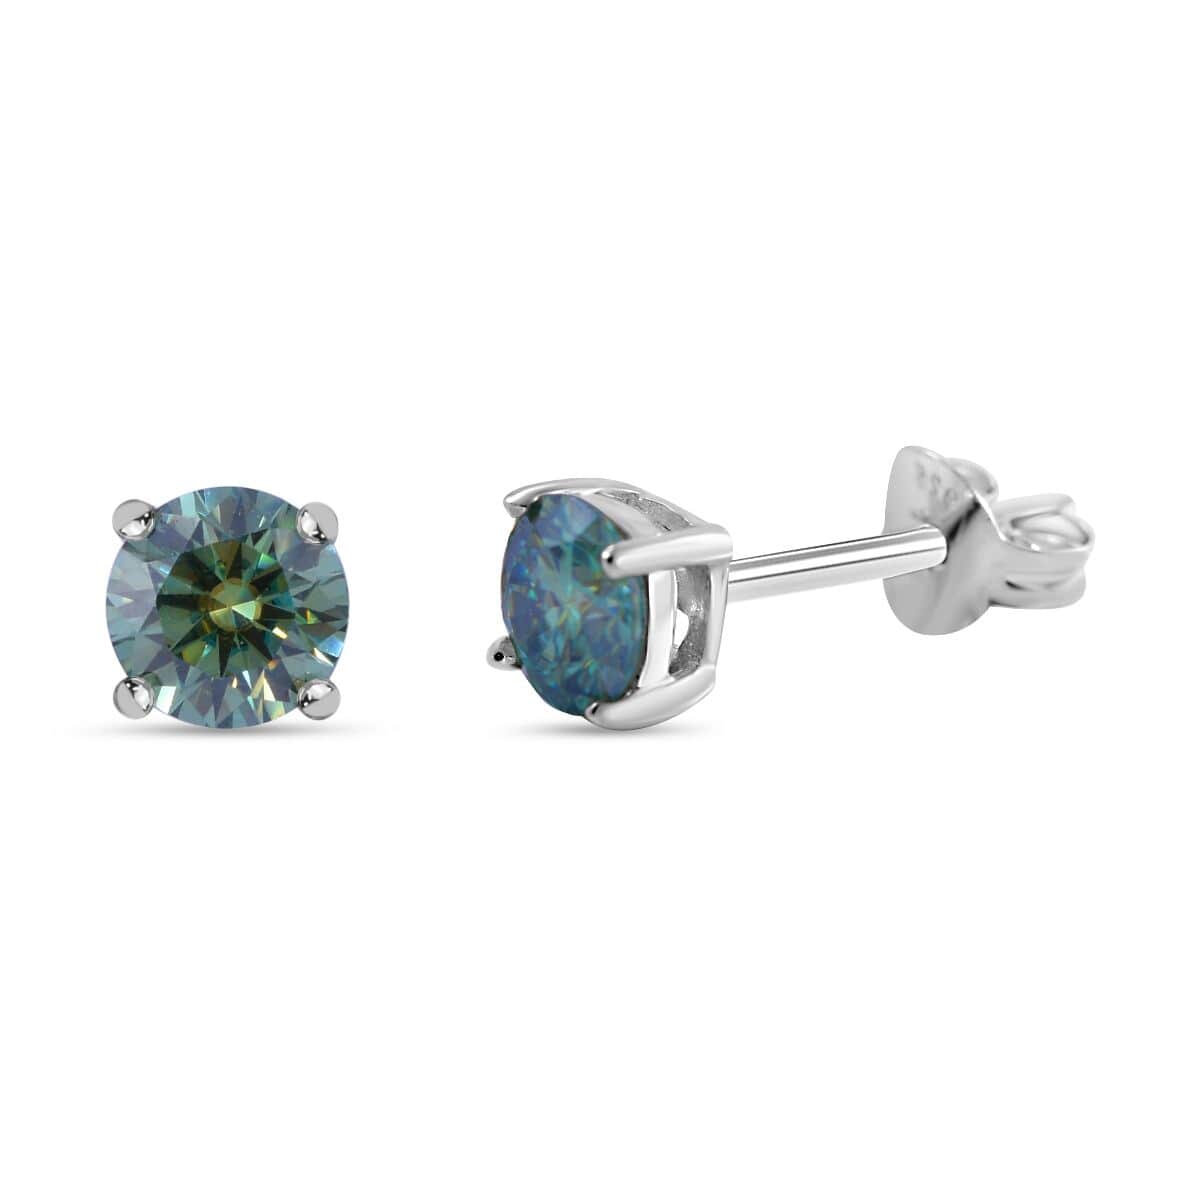 Blue and White Moissanite 2.40 ctw Floral Ring (Size 10.0) and Stud Earrings in Platinum Over Sterling Silver image number 3